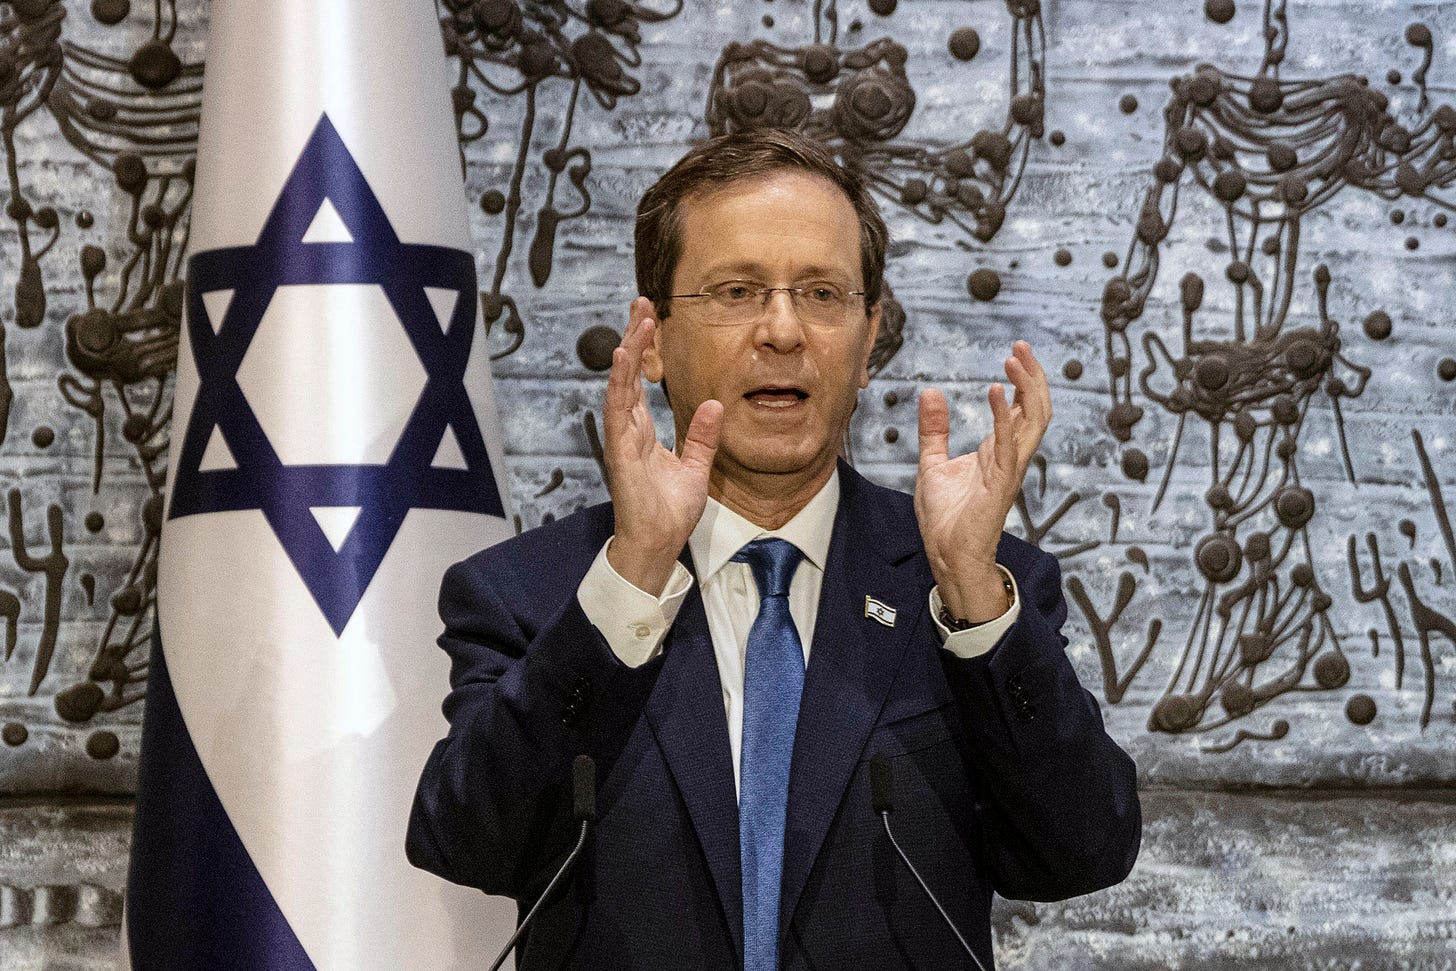 Isaac Herzog vows to 'calm things down' as he is sworn in as new president  of Israel